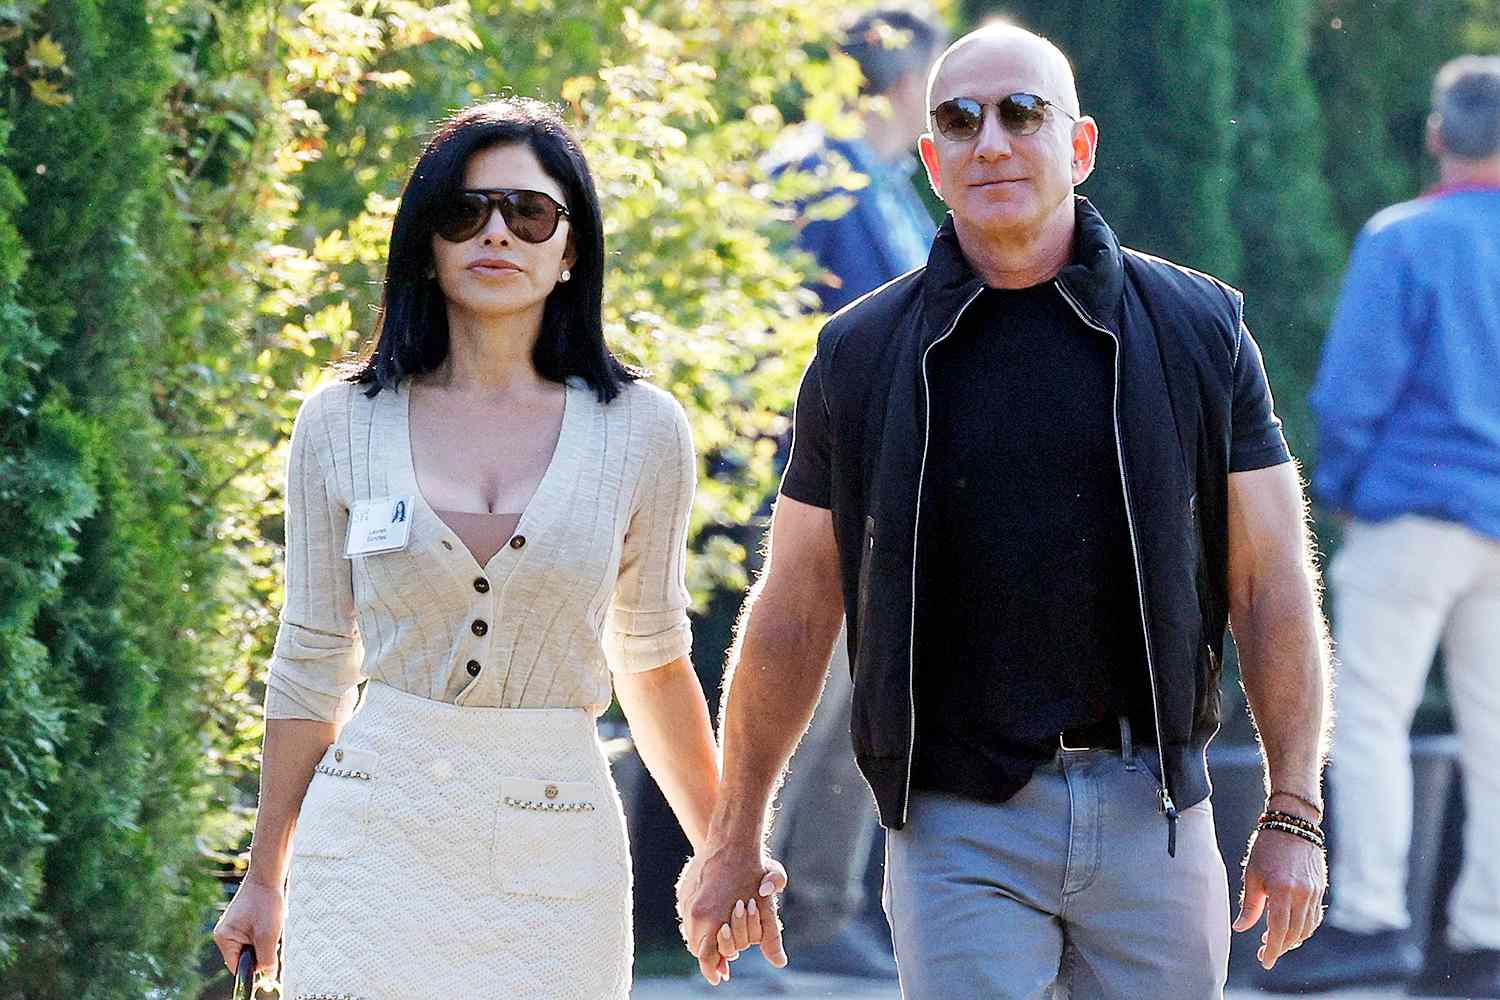 Jeff Bezos and Lauren Sánchez Hold Hands at Annual Conference Known as 'Summer Camp for Billionaires'